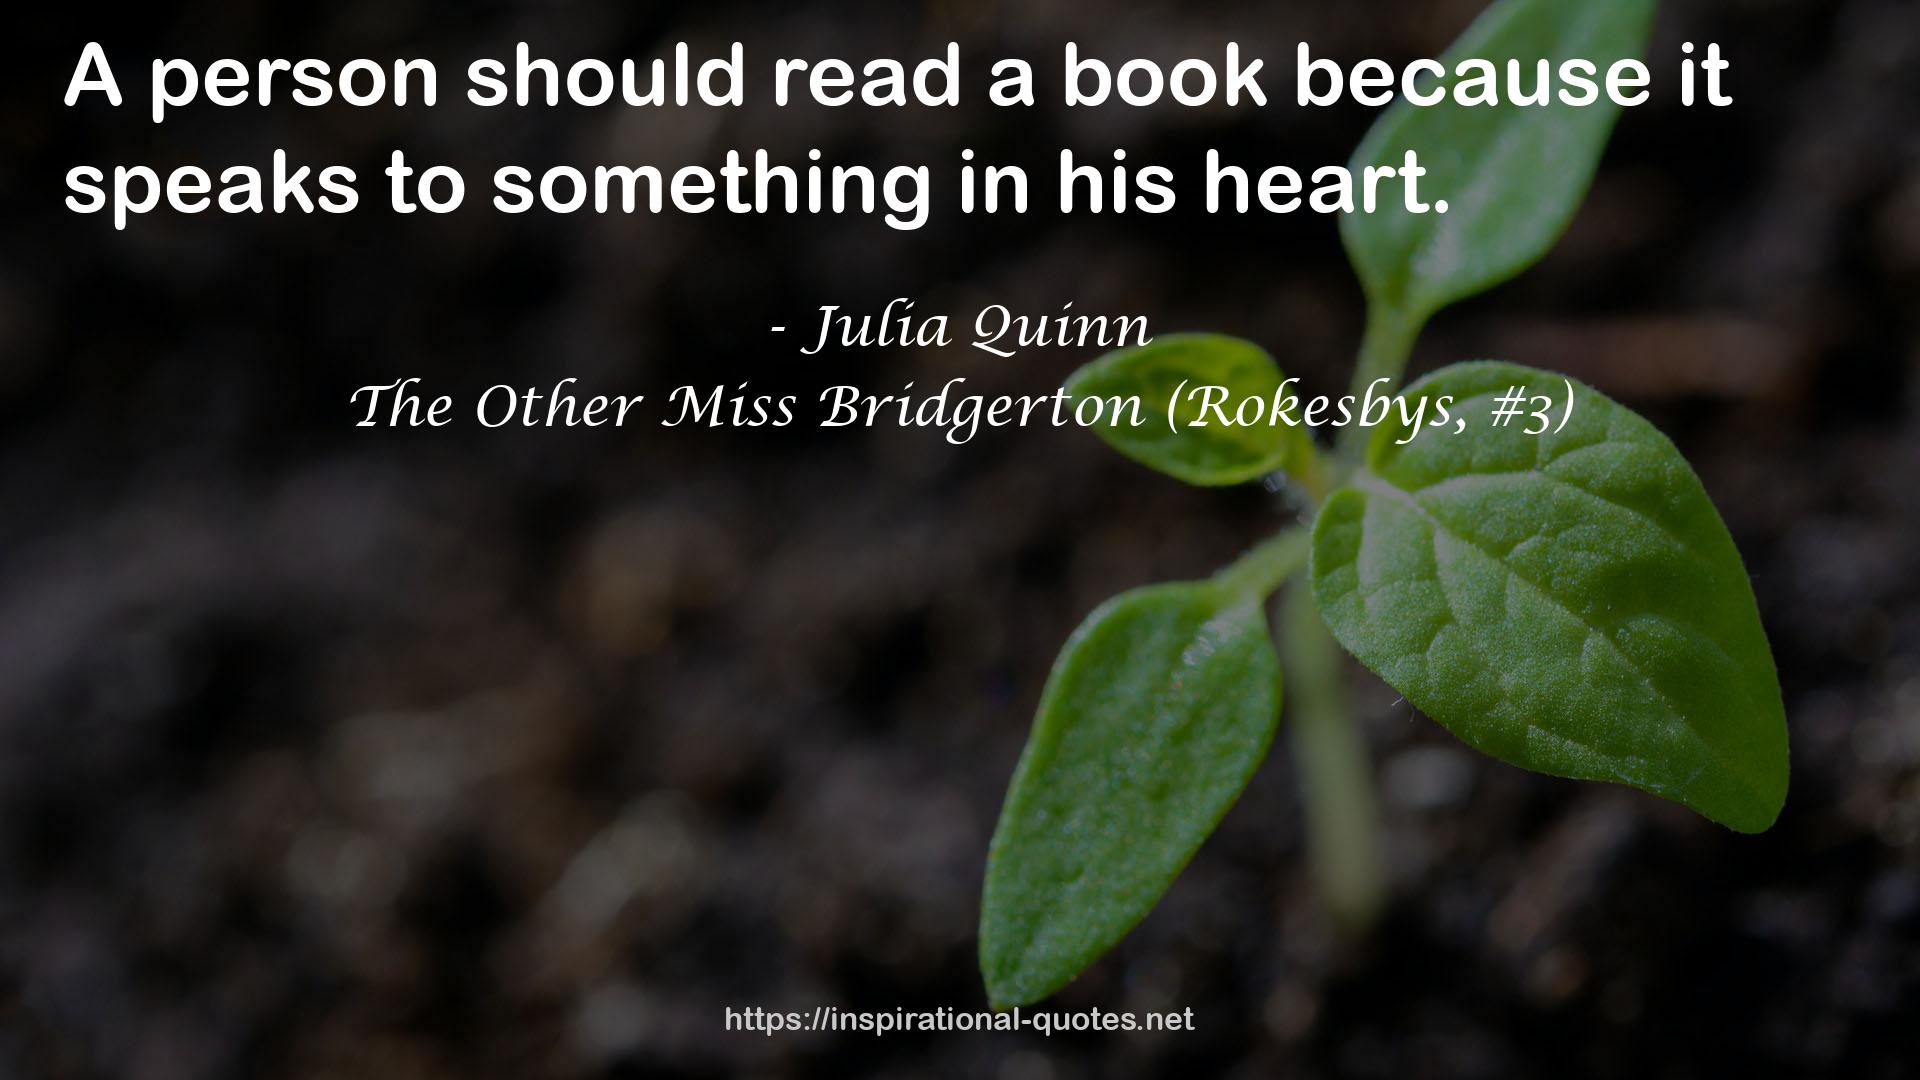 The Other Miss Bridgerton (Rokesbys, #3) QUOTES